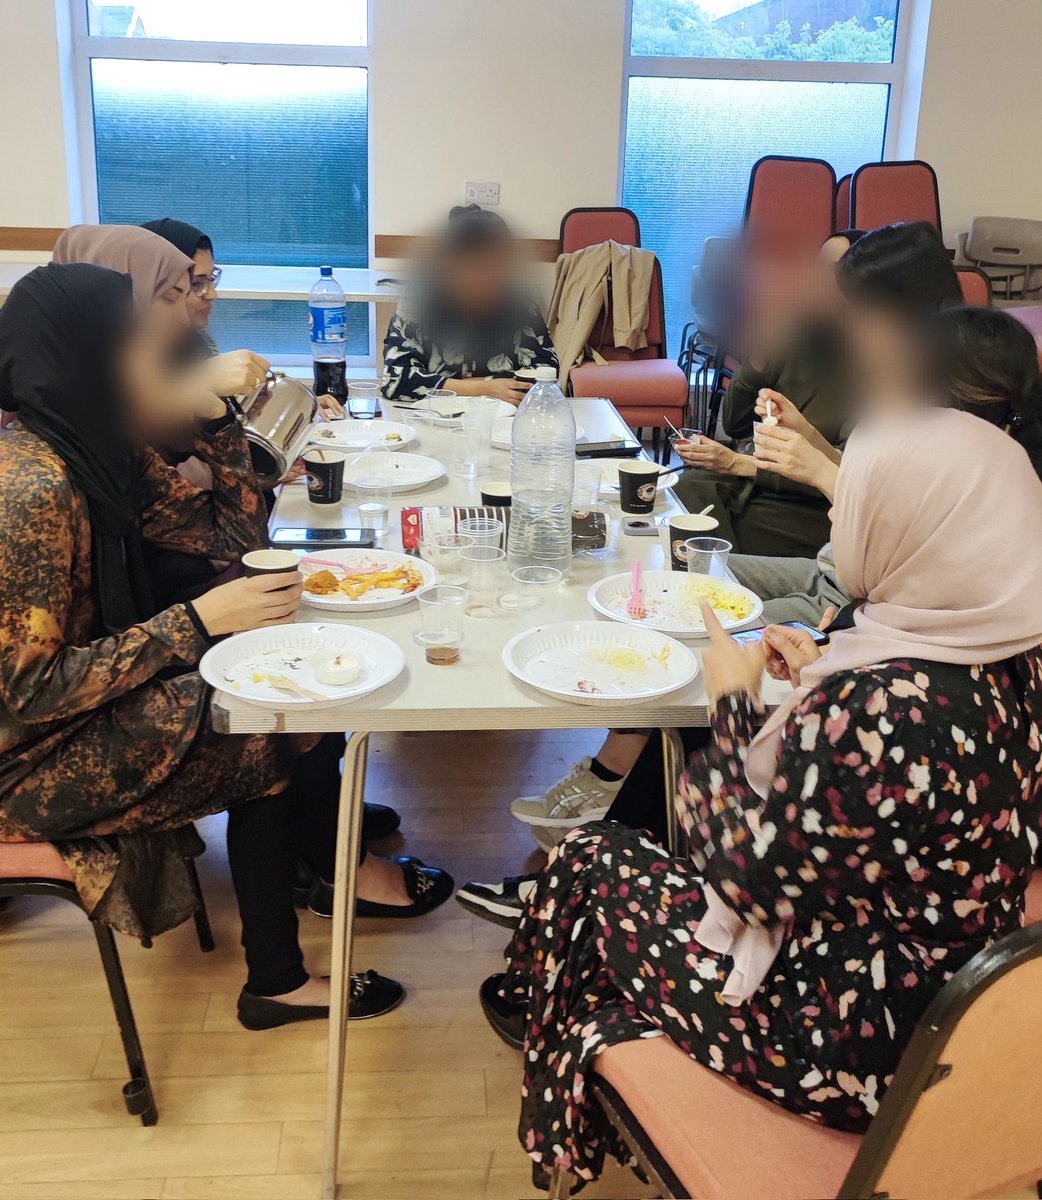 Our volunteers organised a Eid party for the group. Celebrating their achievements aswell as Eid, really proud of all the positive changes they have made and the great work they are doing 🥳🎉😍 #WomenEmpowerment #boltoncvs #gmca #CommunityEngagement